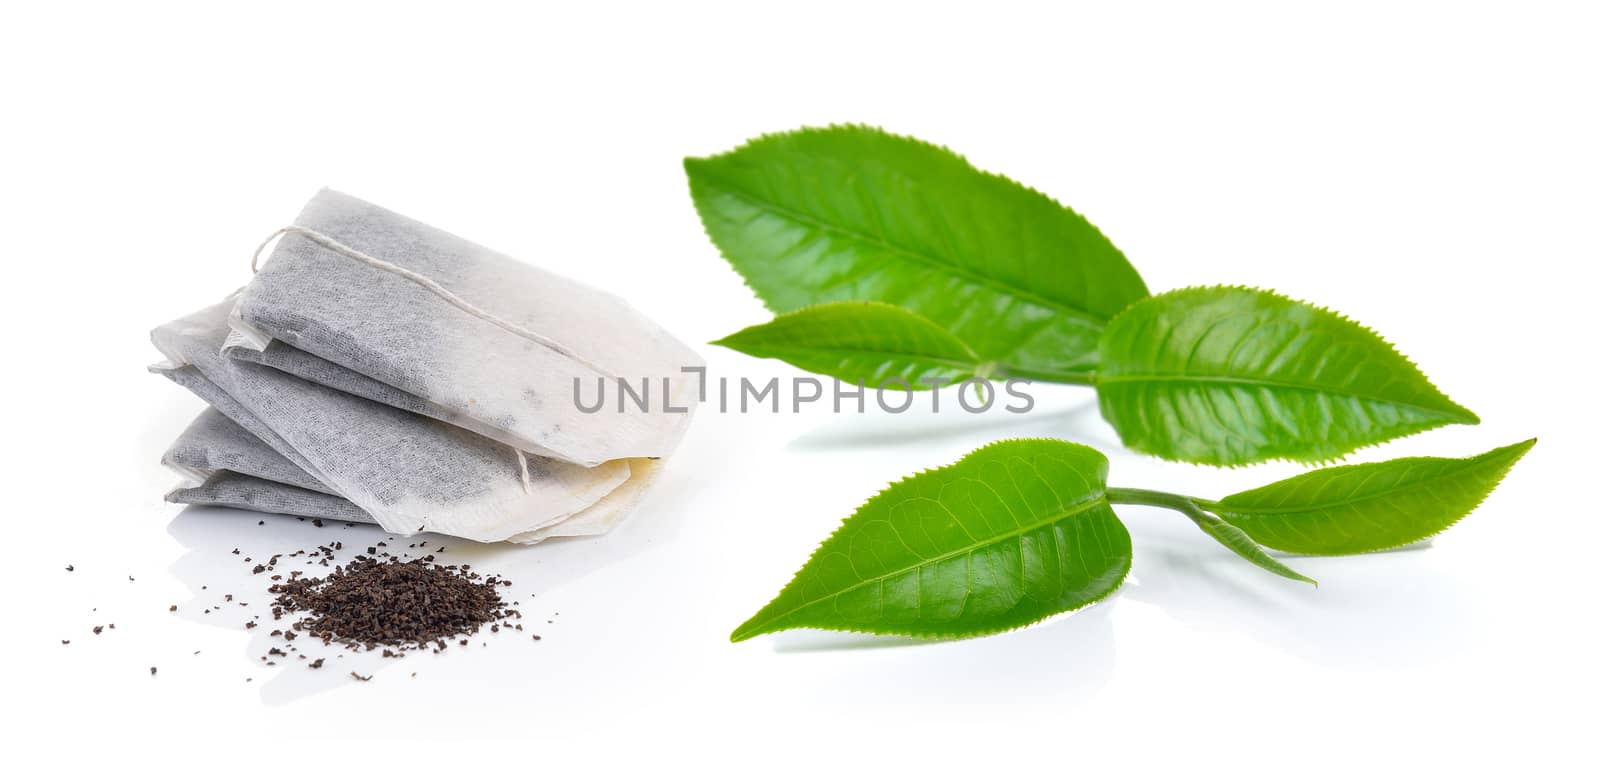 Teabag and tea Isolated on white background by sommai